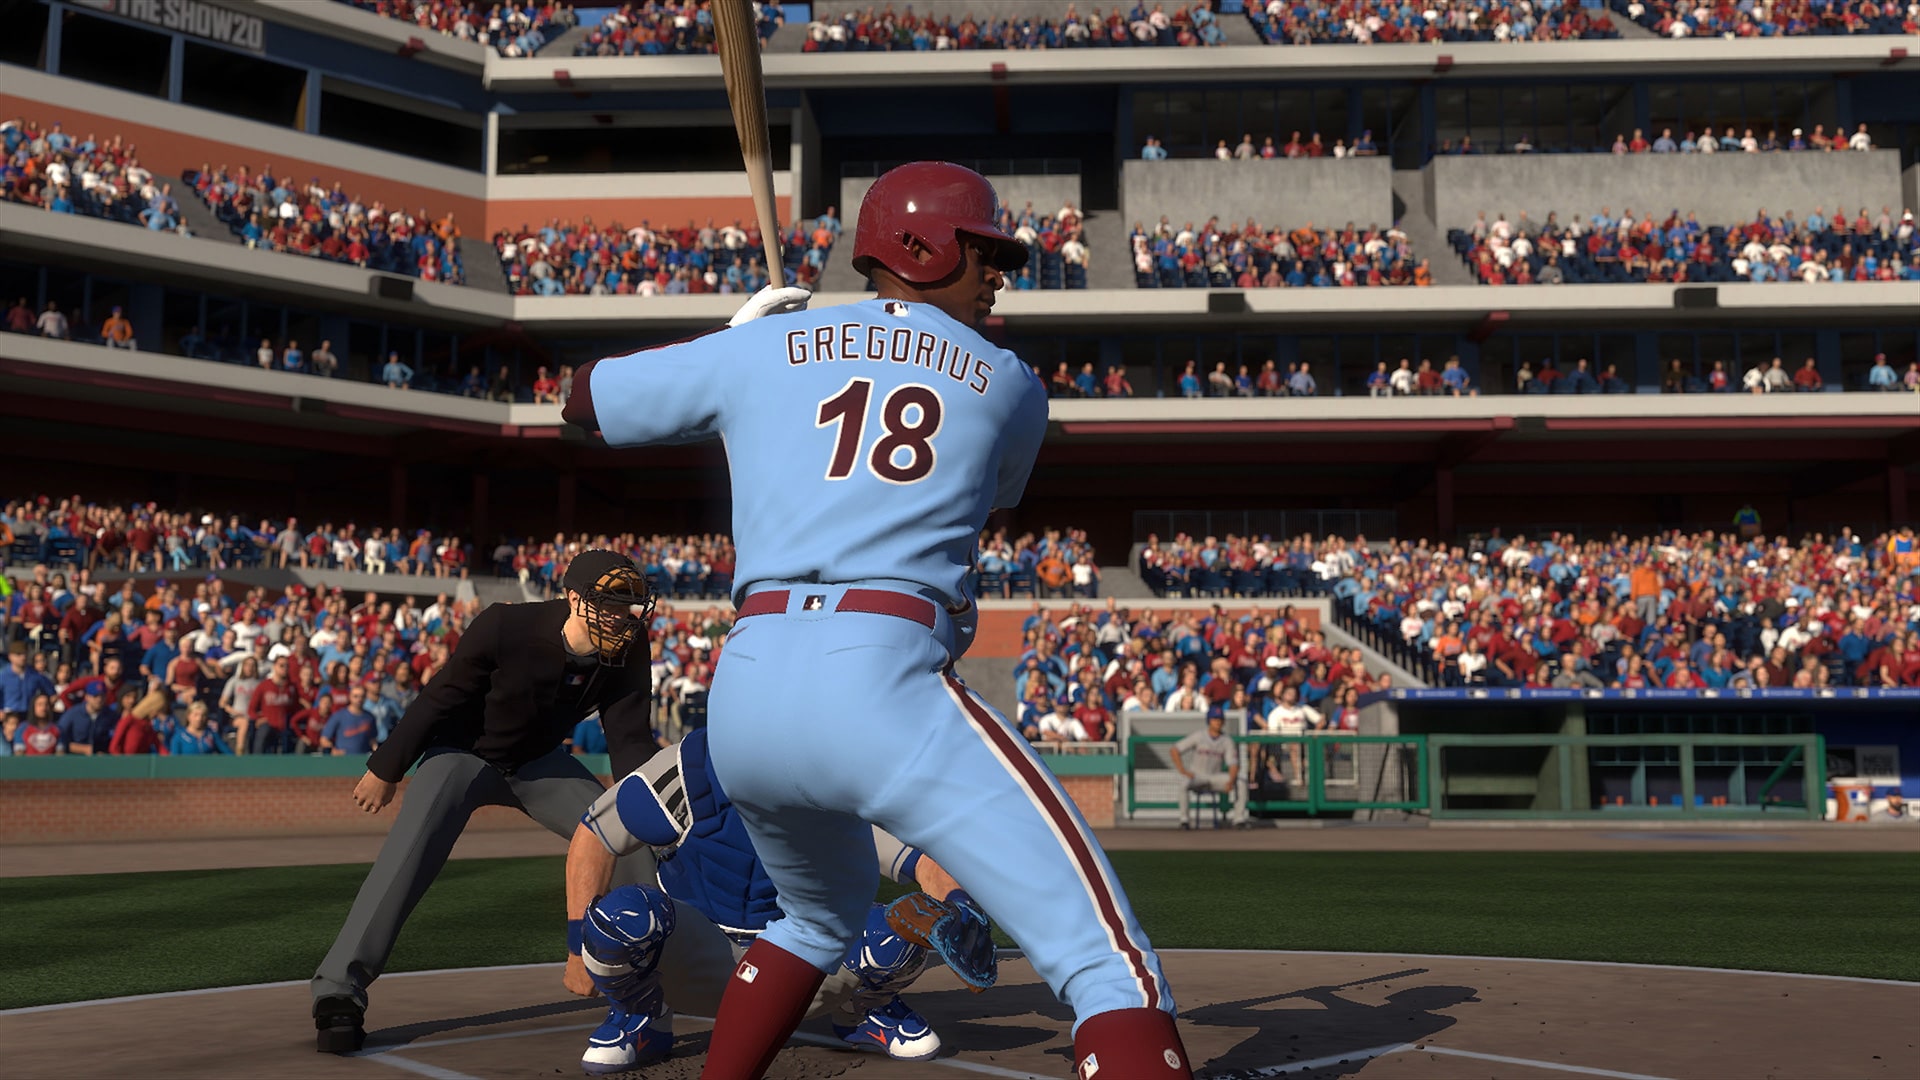 MLB The Show 20 Digital Deluxe Edition on PS4 — price history